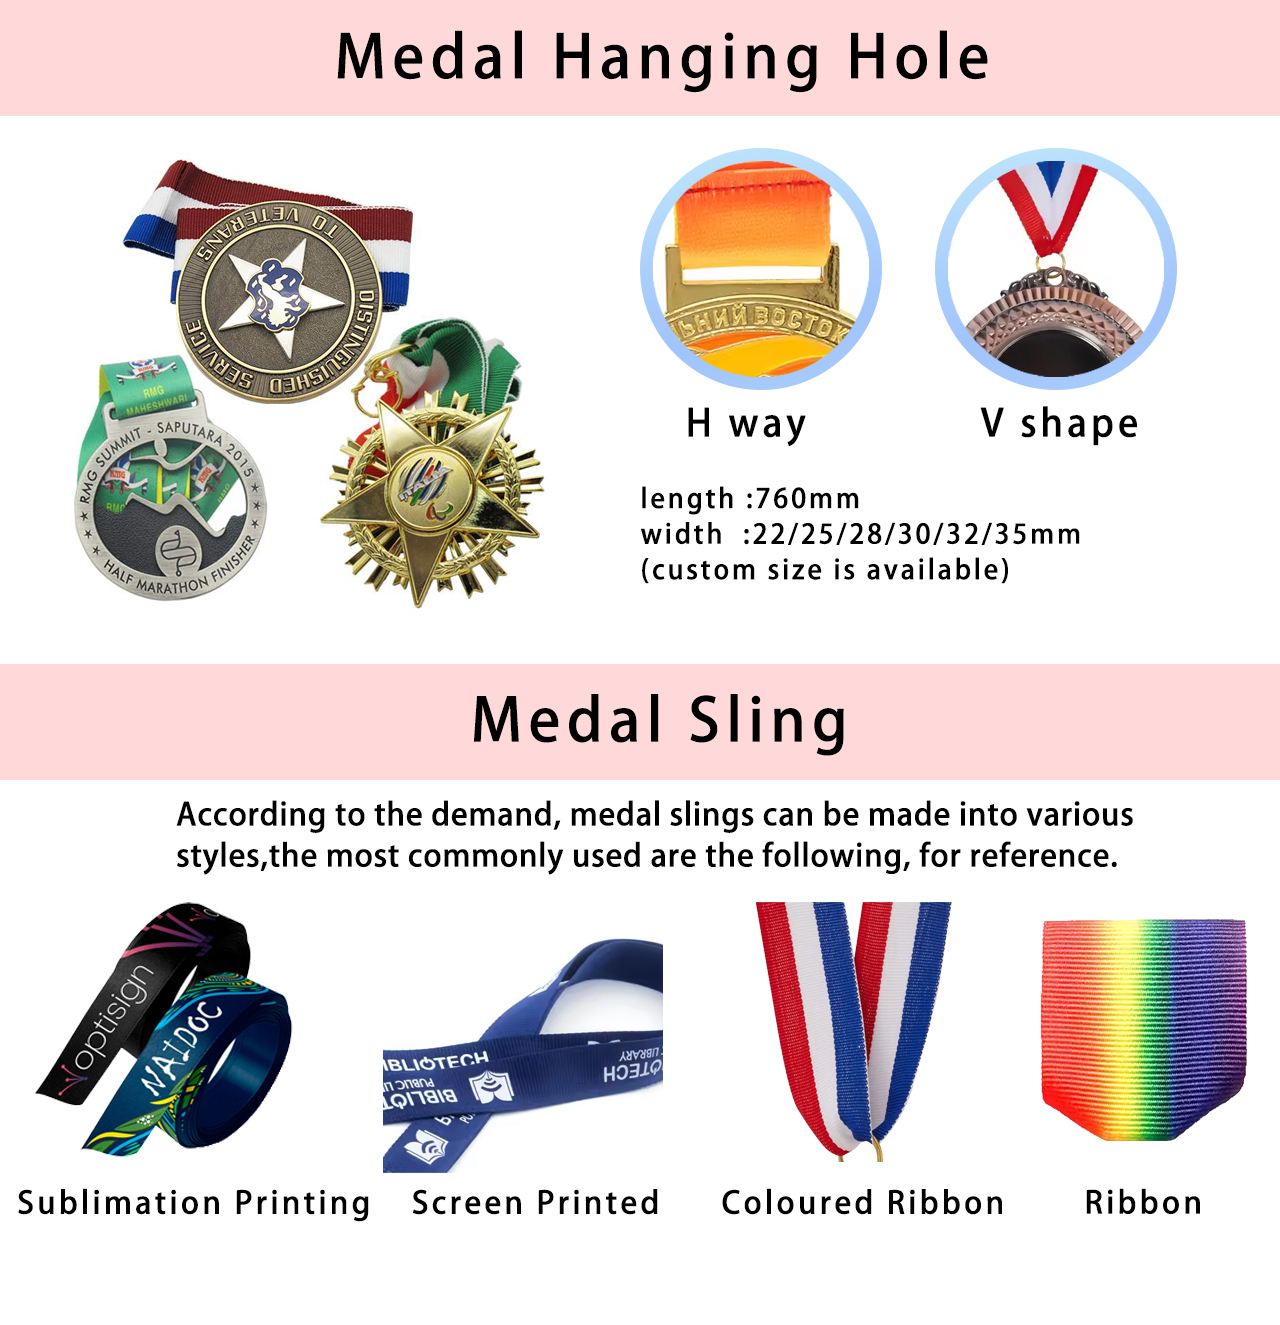 IT’S EASY TO CUSTOMIZE A MEDAL WITH A RIBBONvc1